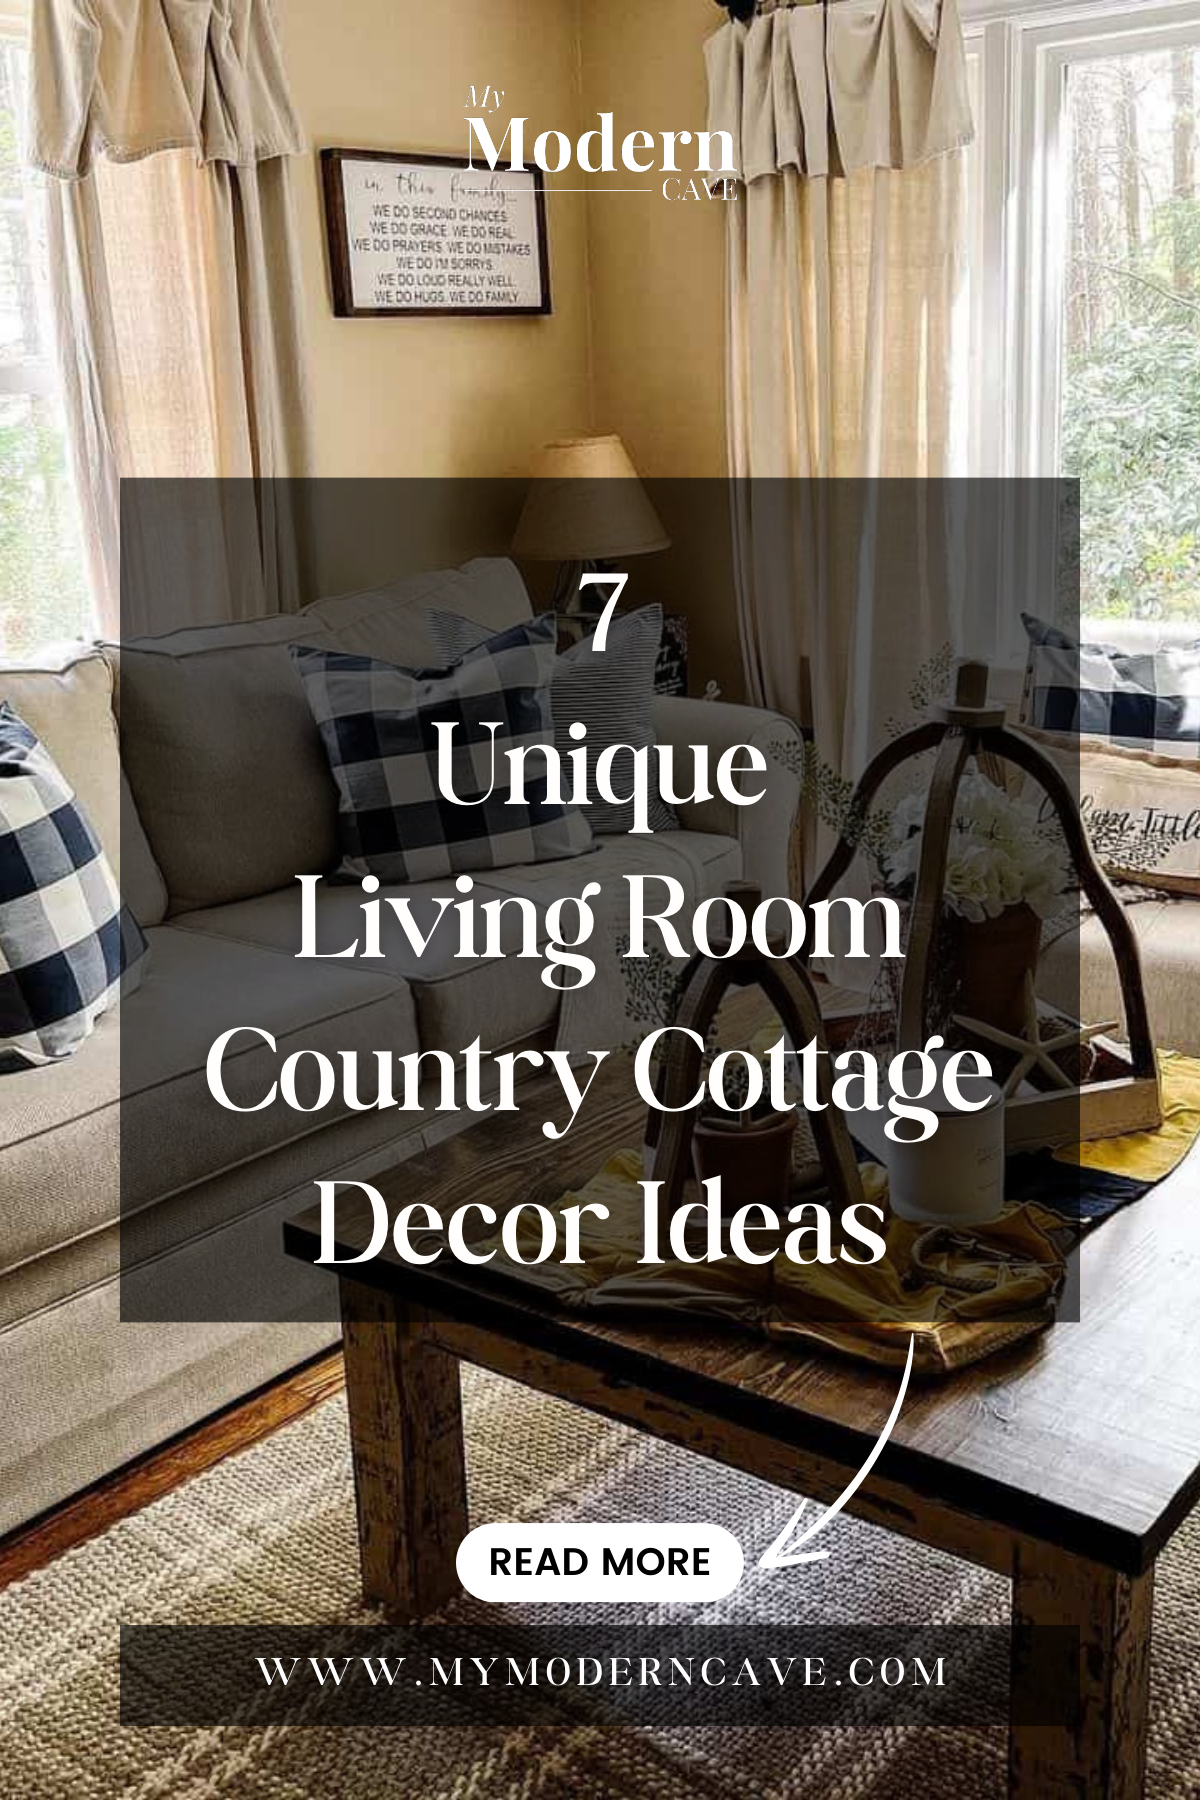 Living Room Country Cottage Decor Ideas Infographic